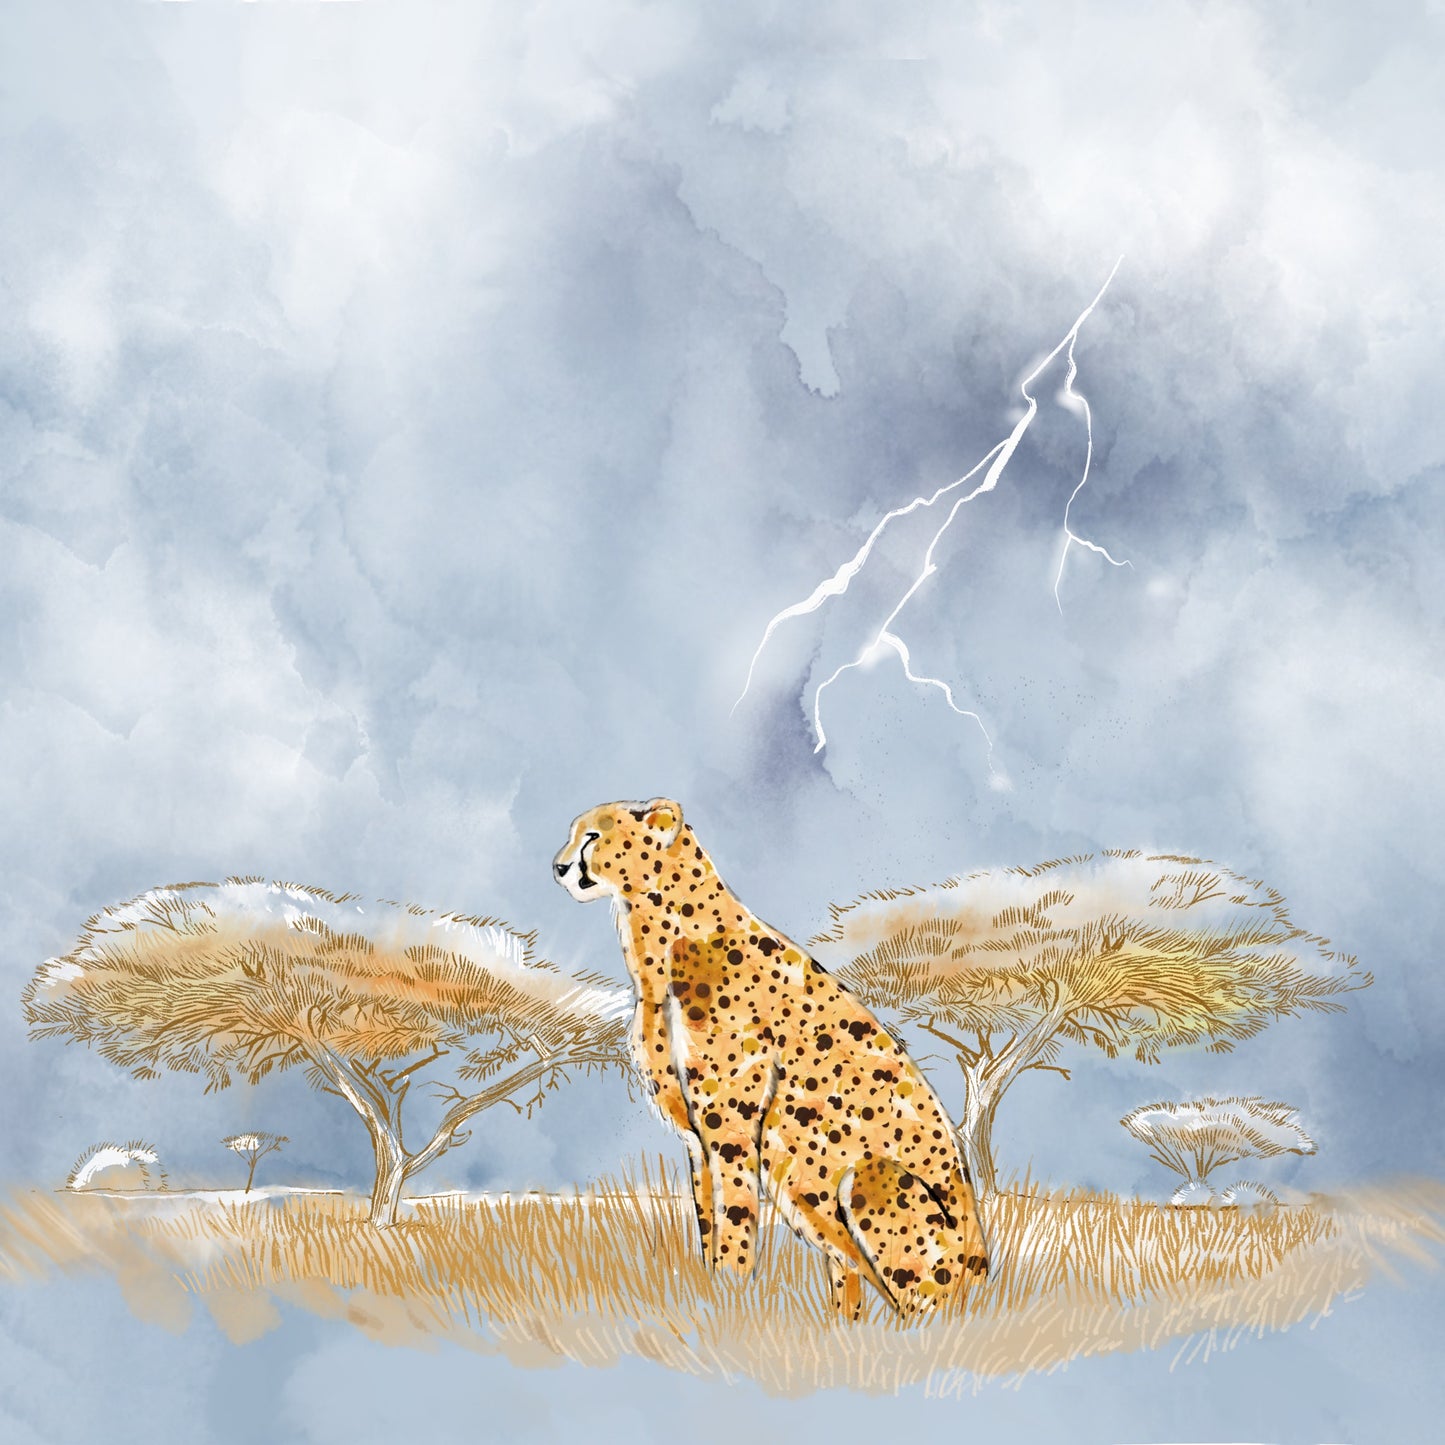 African Rain - Illustrated Print by Thomas Little